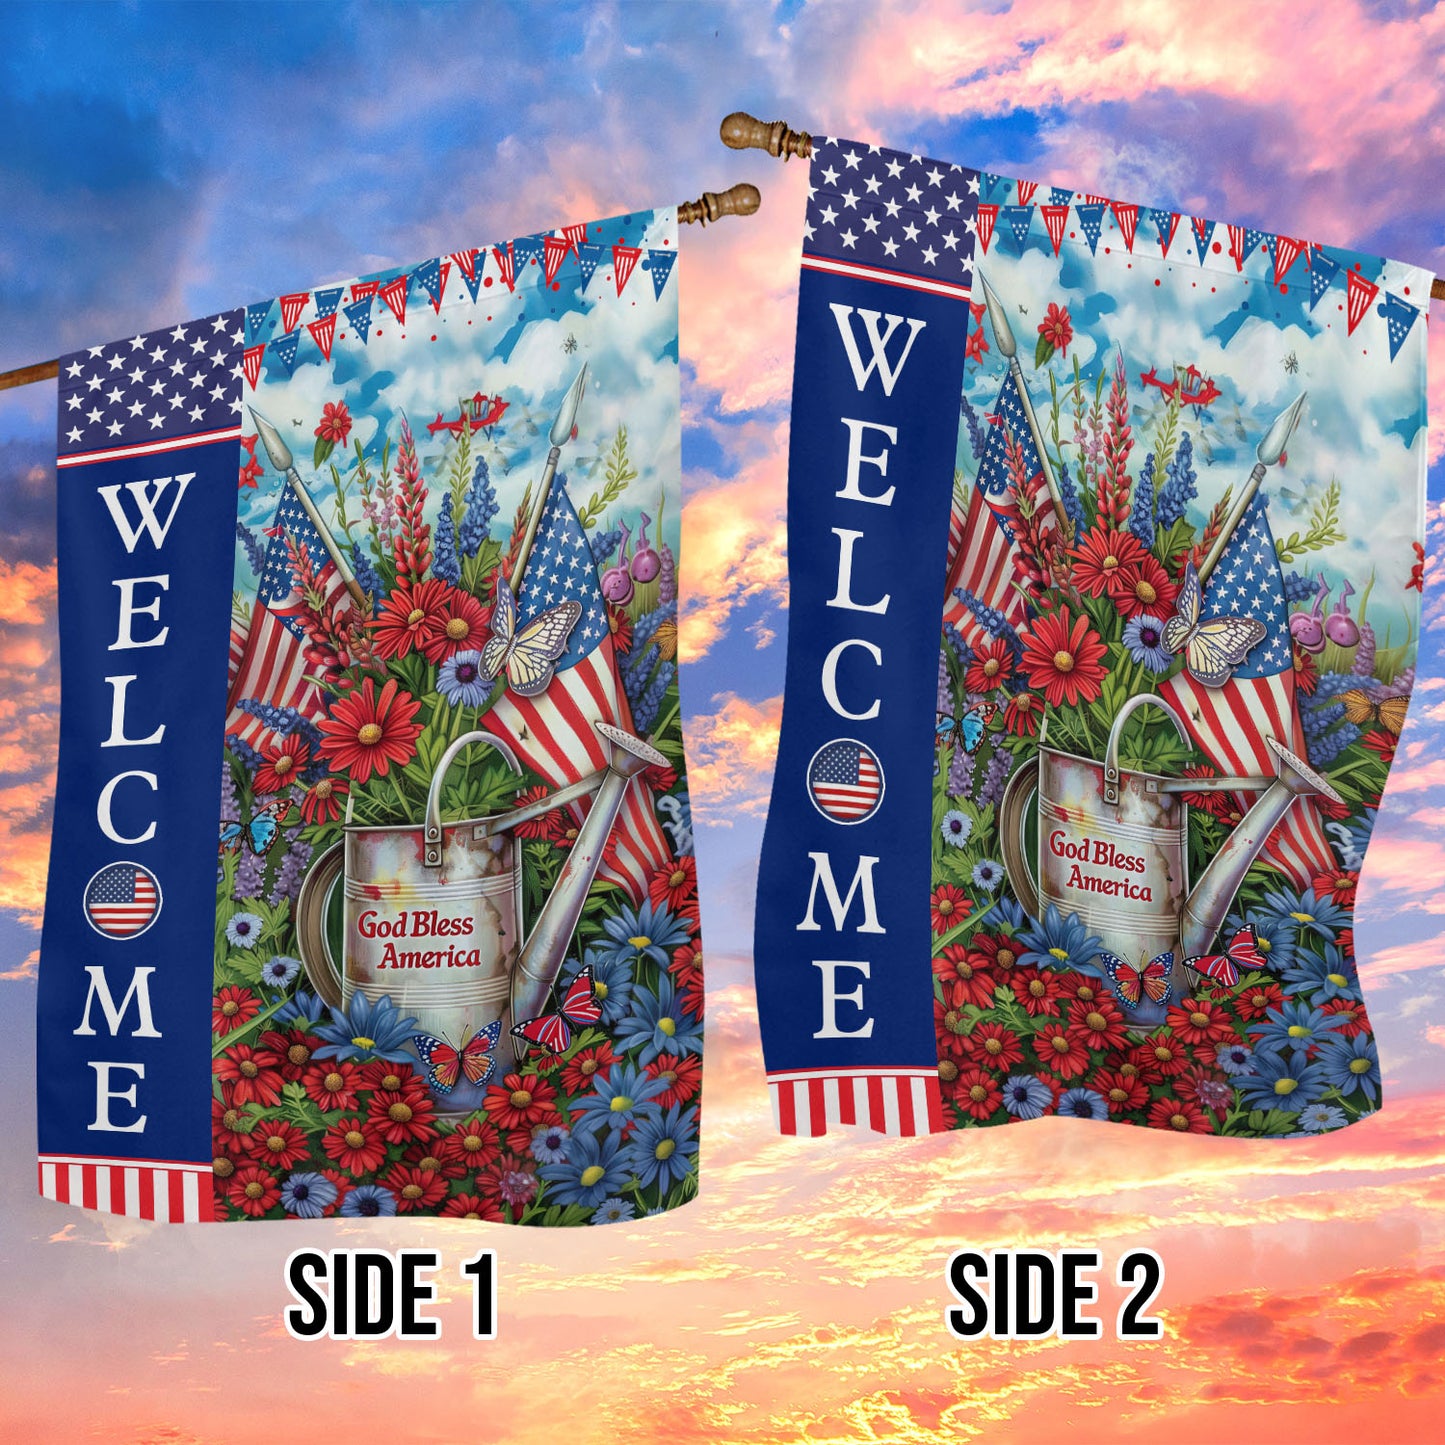 July 4th Garden Flag - House Flag, Welcome God Bless America, Independence Day Yard Flag Gift For America Lovers